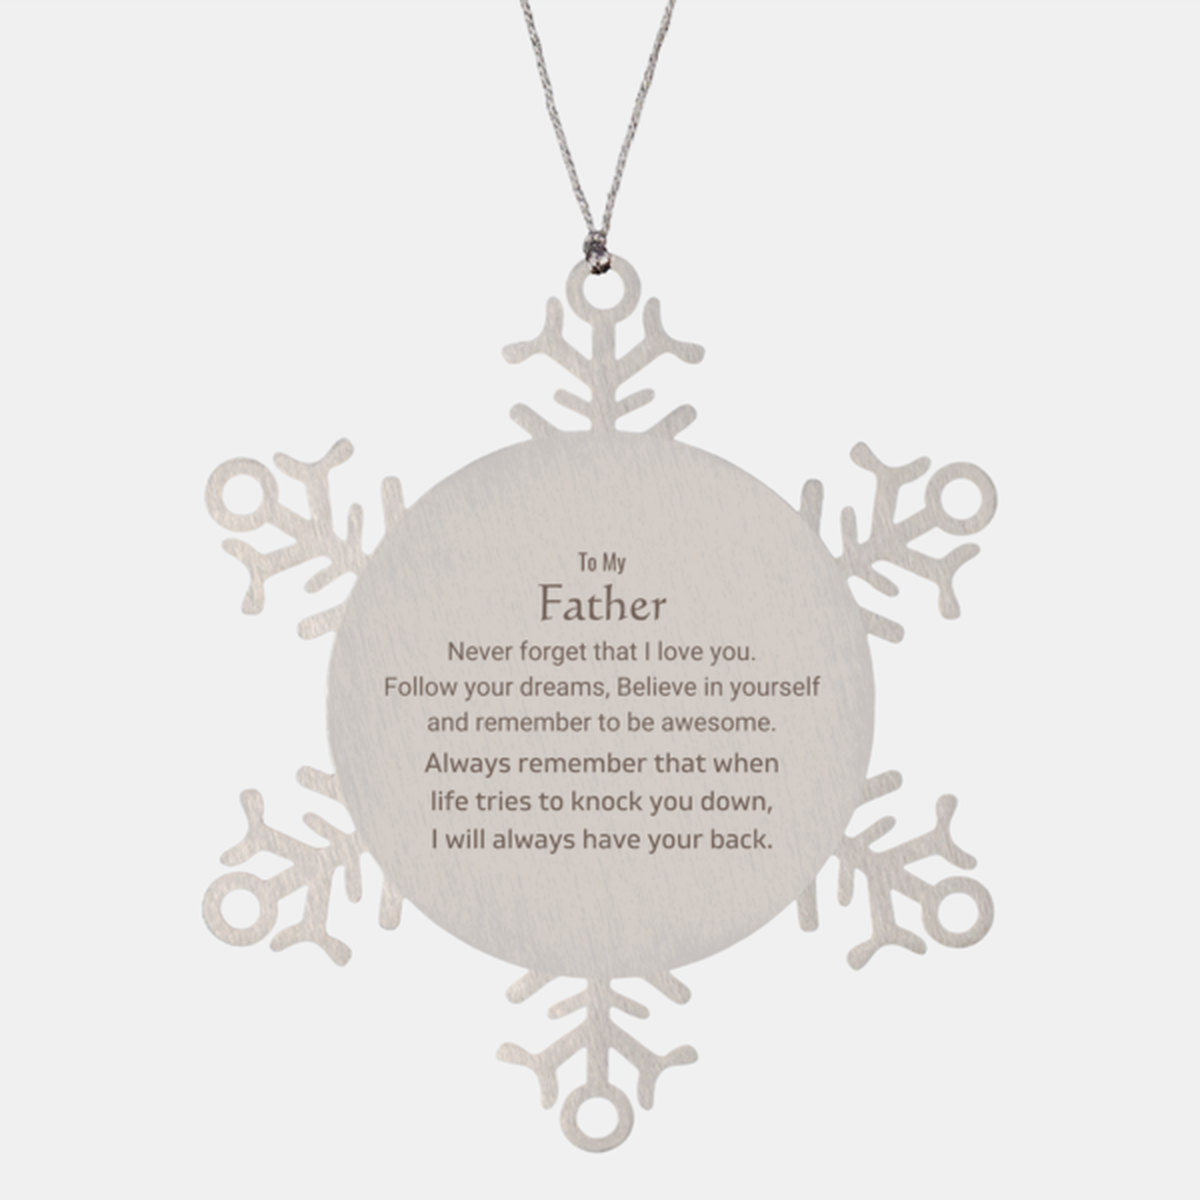 Inspirational Gifts for Father, Follow your dreams, Believe in yourself, Father Snowflake Ornament, Birthday Christmas Unique Gifts For Father